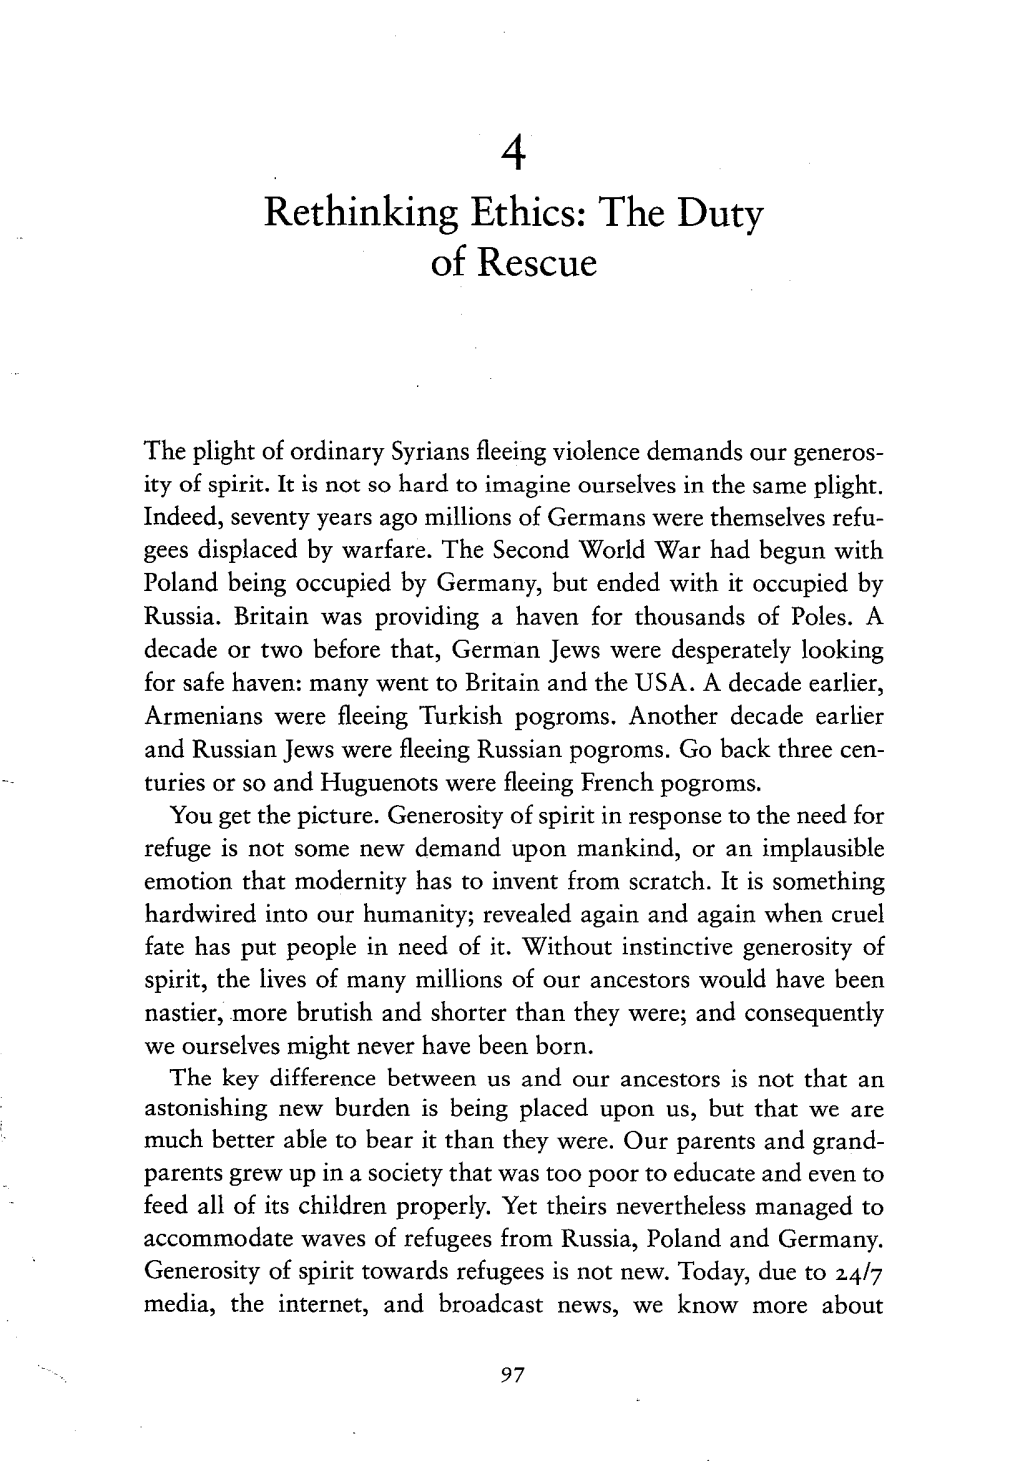 Rethinking Ethics: the Duty of Rescue